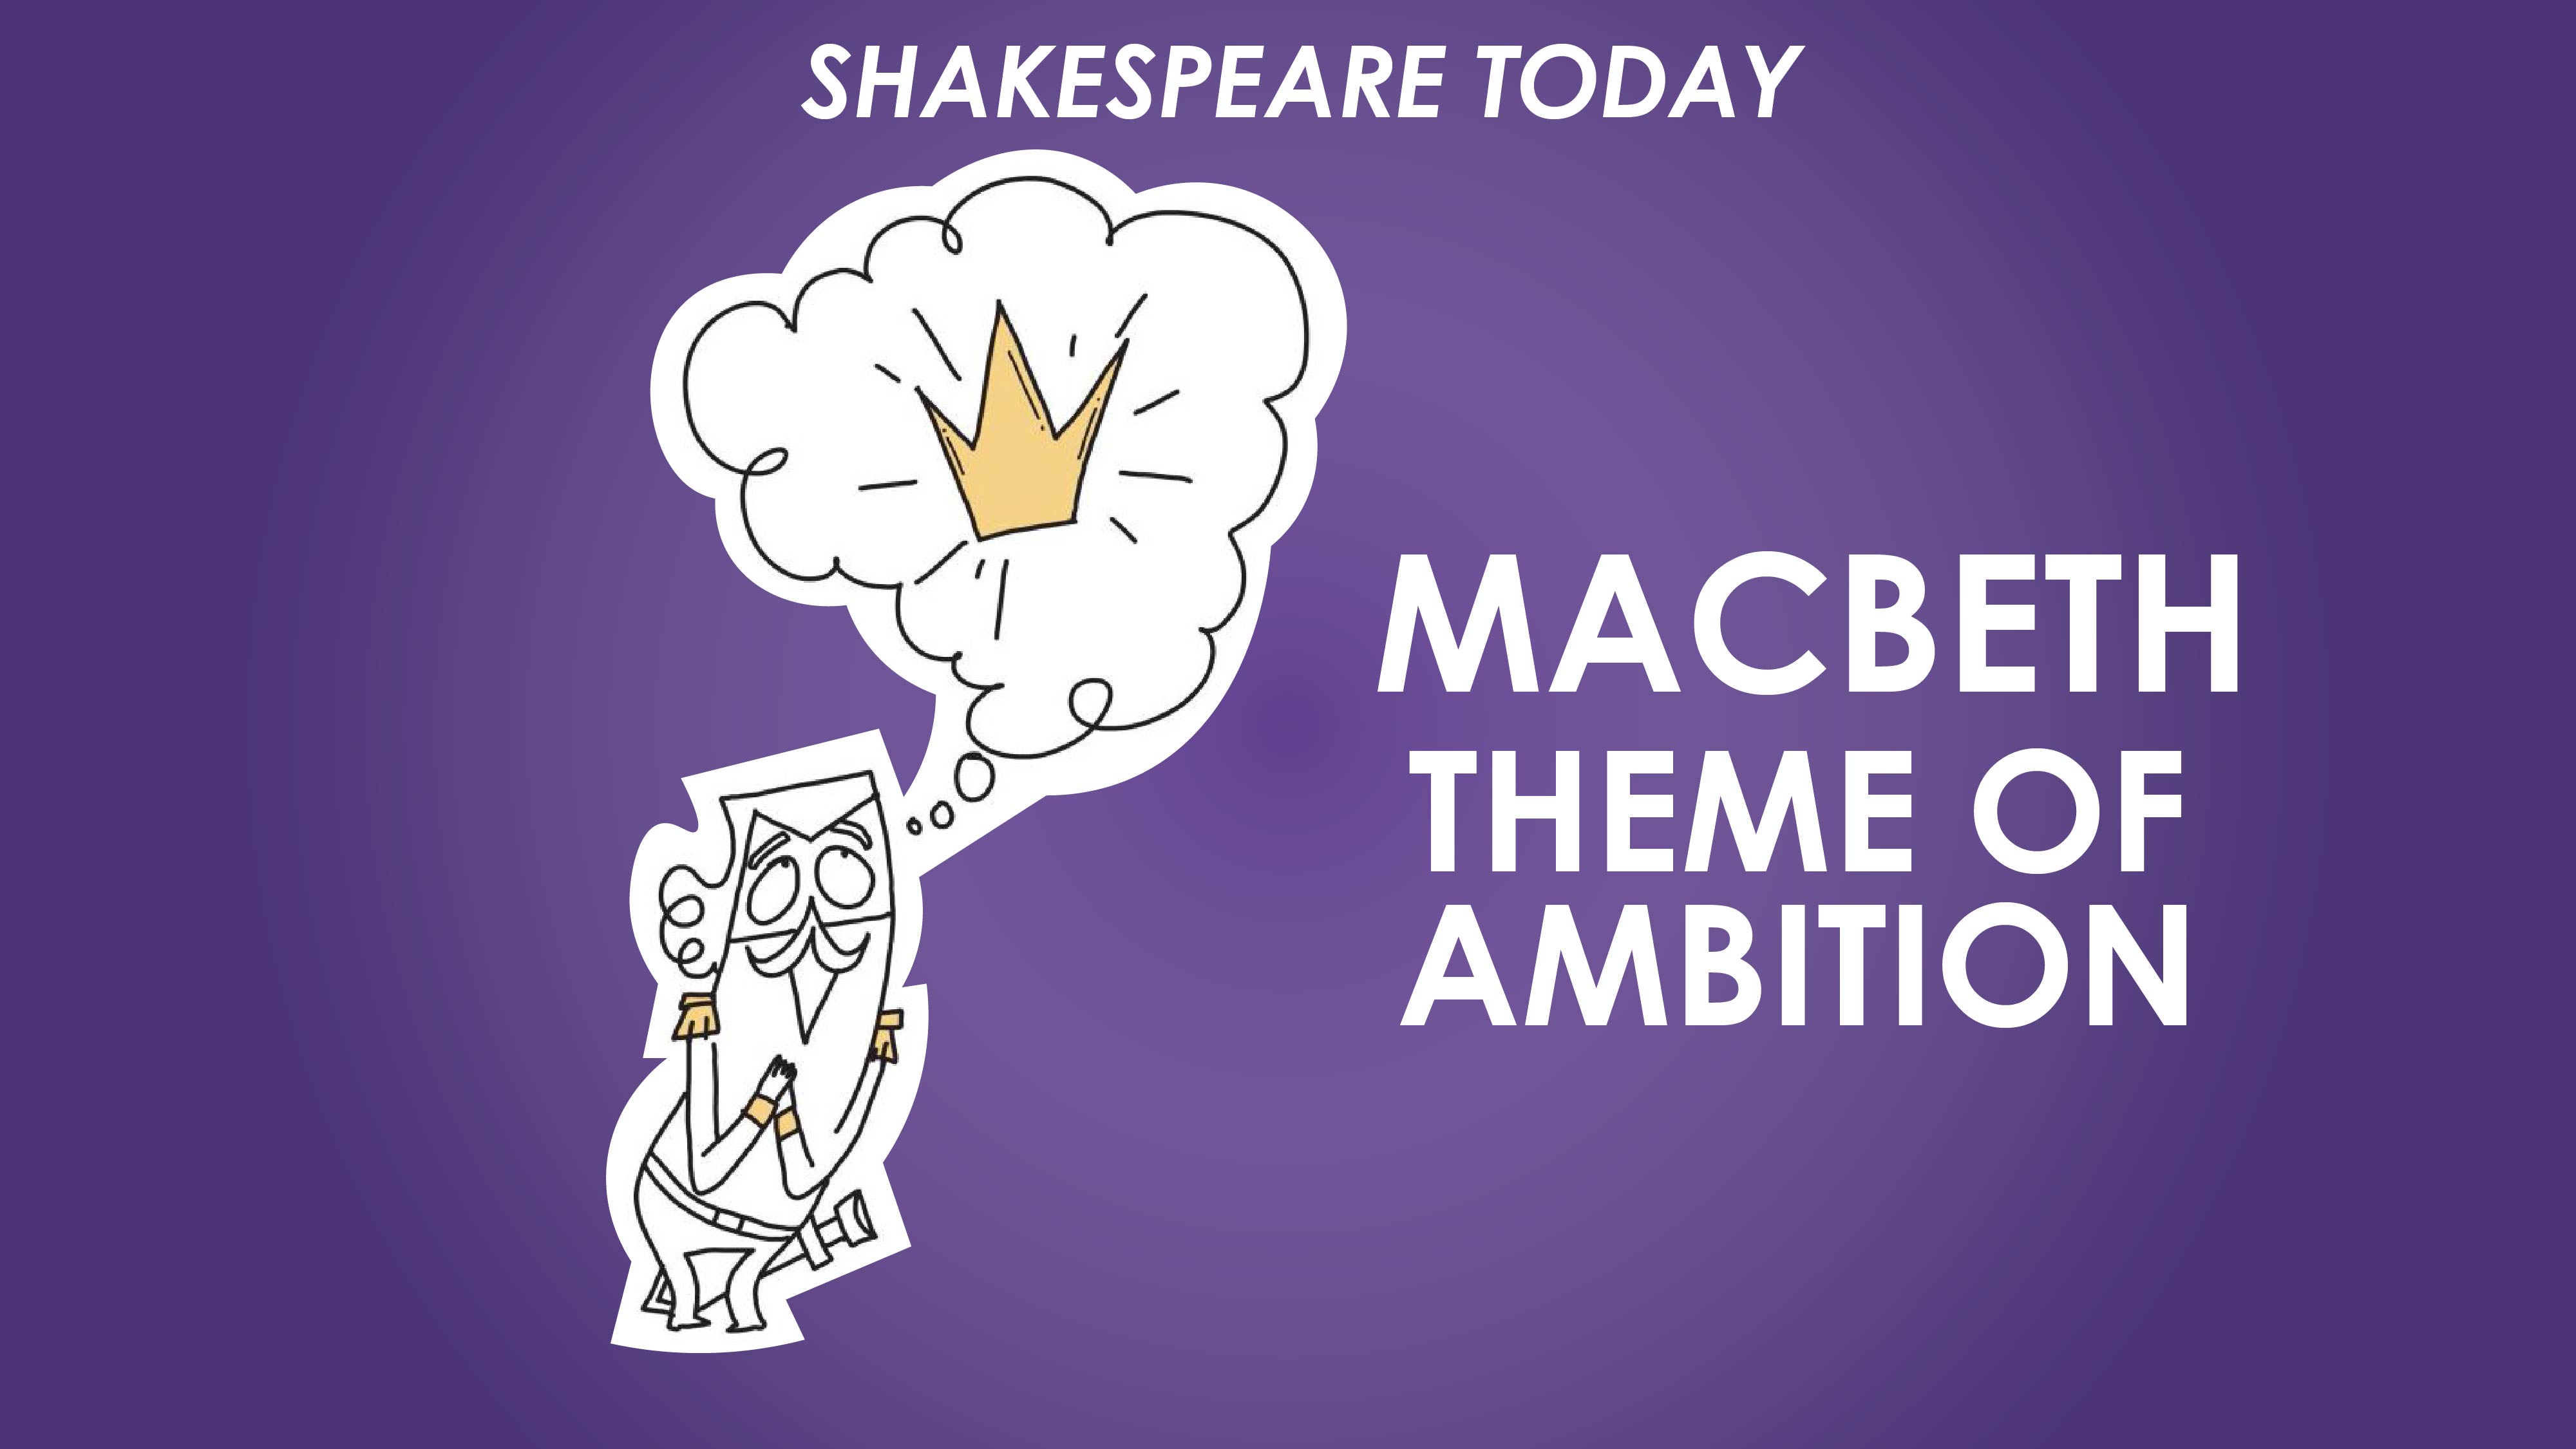 Macbeth Theme of Ambition - Shakespeare Today Series